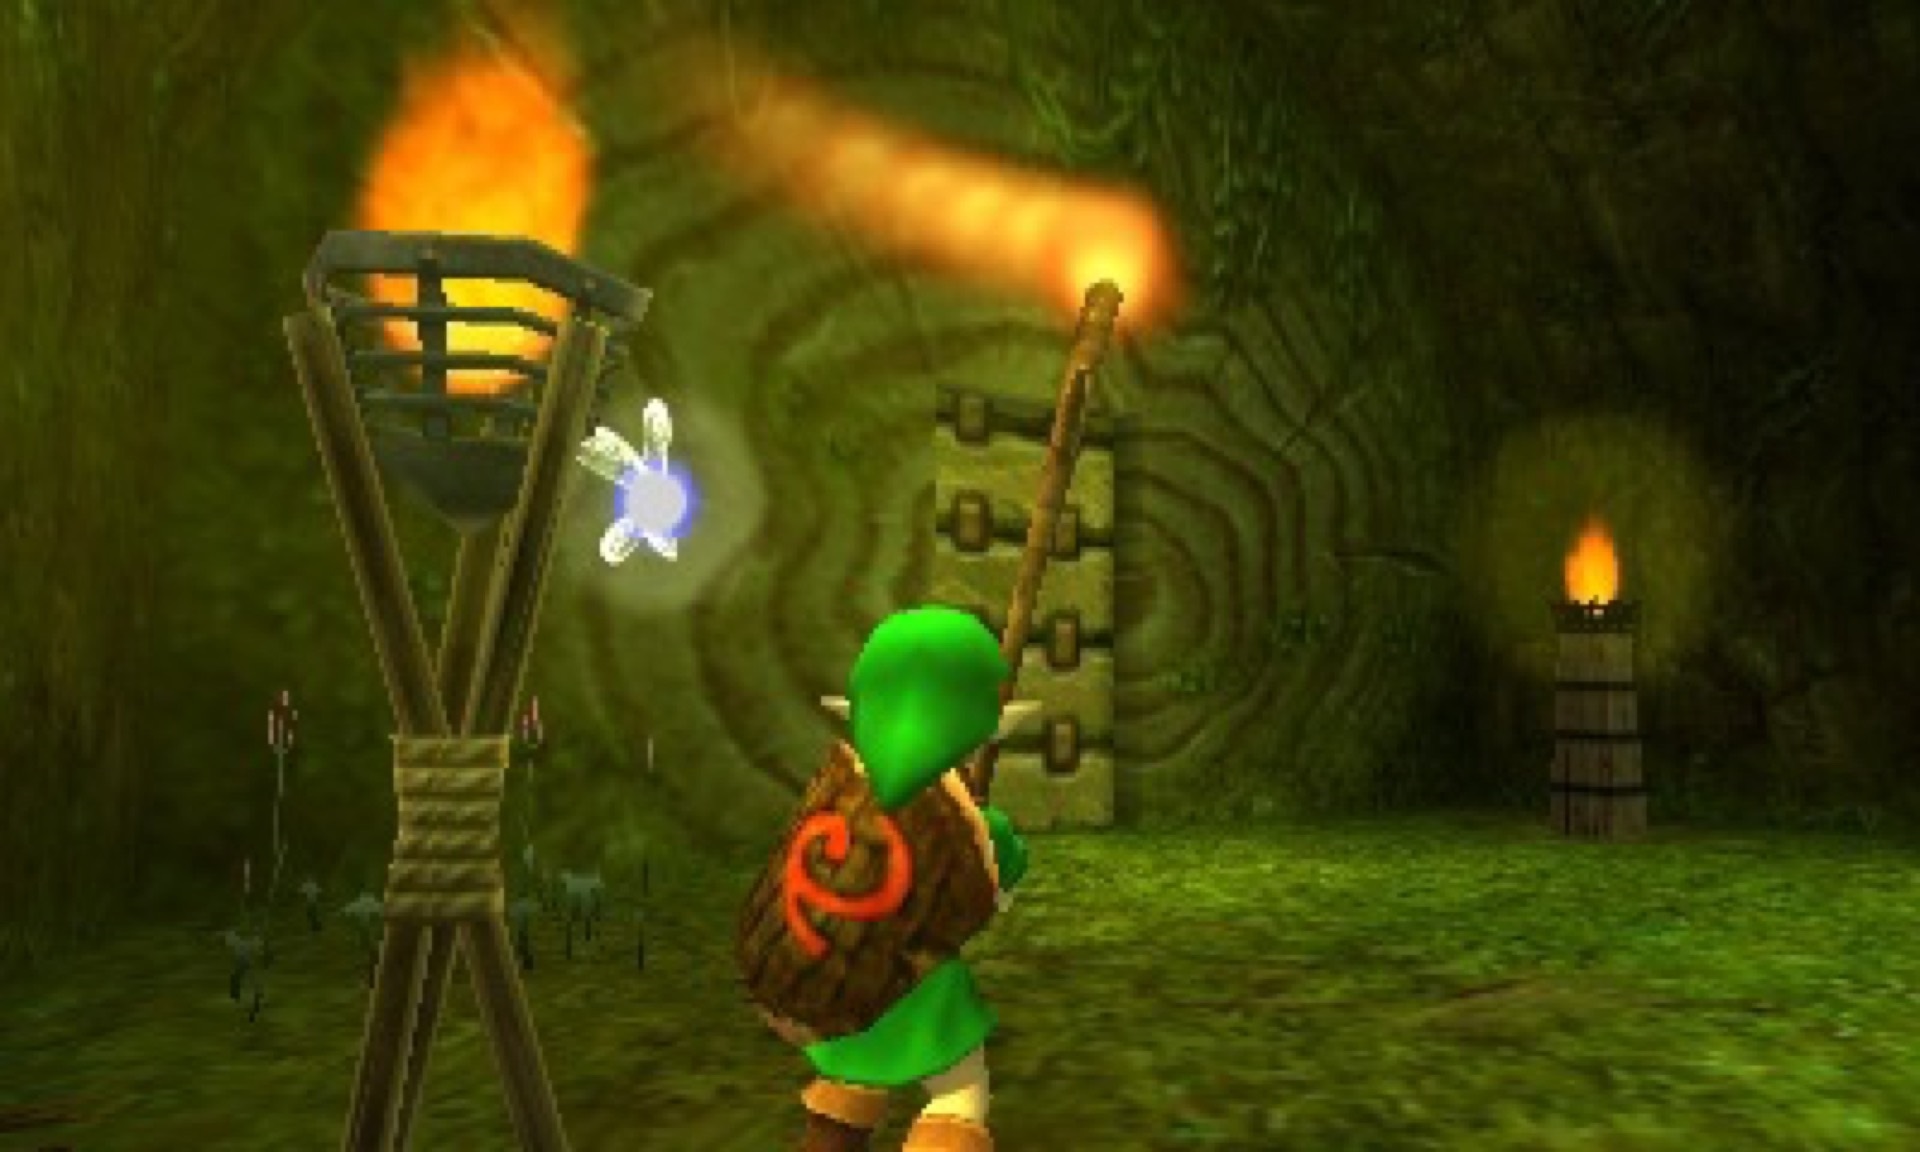 Ocarina of Time - Link’s Emotional Transformation & The Cruel Passage of Time